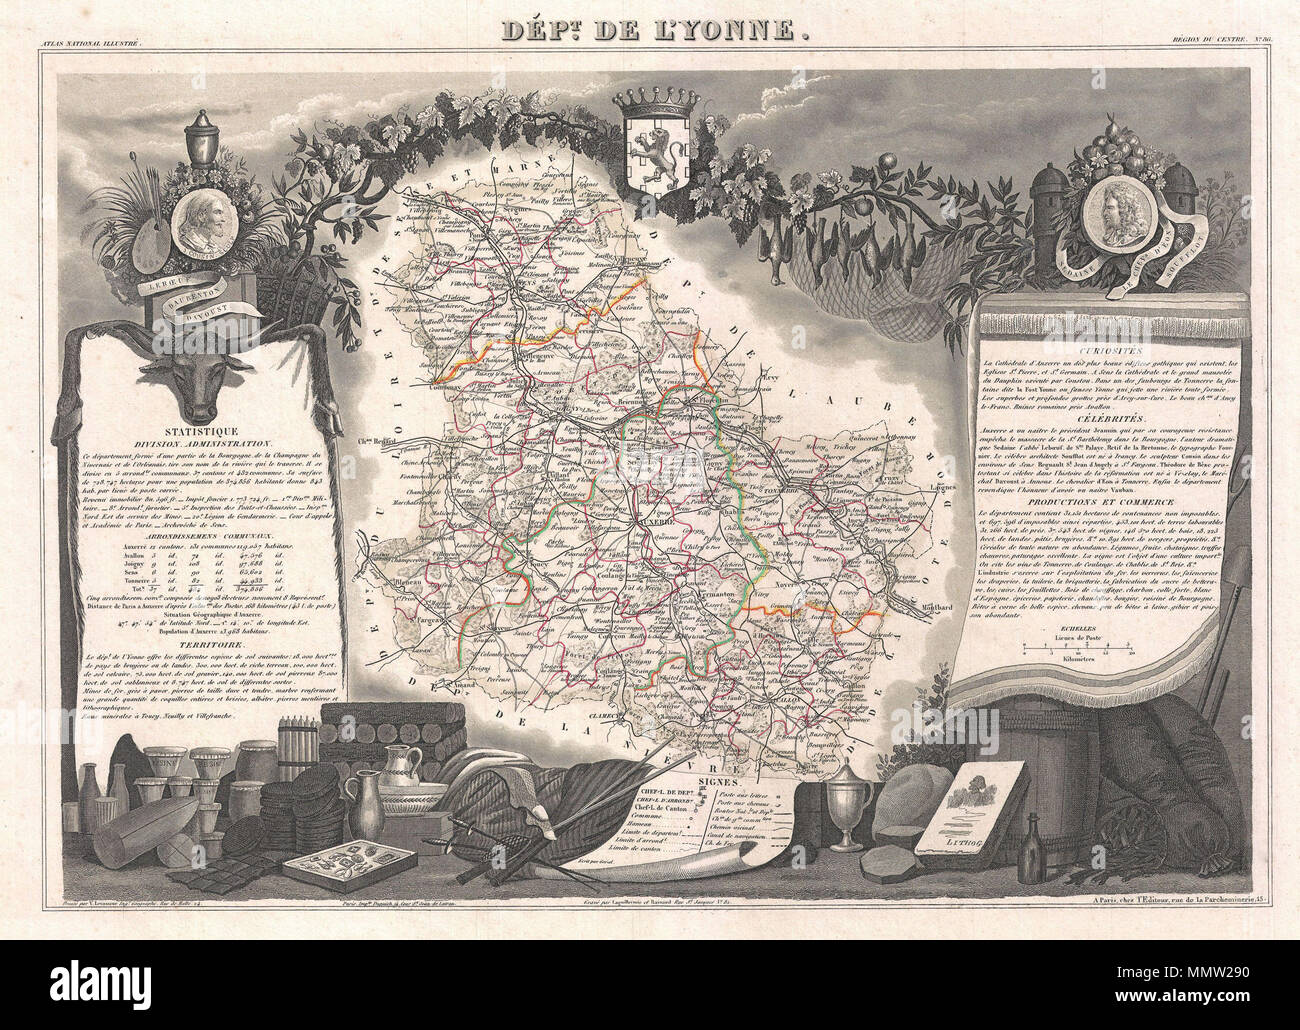 .  English: This is a fascinating 1852 map of the French department of L'Yonne, France. L'Yonne is of France's premier Burgundy wine region and produces some of the worlds finest reds. Yonne is also one of only two departments that produce Chaource cheese. Chaource is a cow's milk cheese, cylindrical in shape. The central pâte is soft, creamy in color, and slightly crumbly, and is surrounded by a white penicillium candidum rind. The whole map is surrounded by elaborate decorative engravings designed to illustrate both the natural beauty and trade richness of the land. There is a short textual  Stock Photo